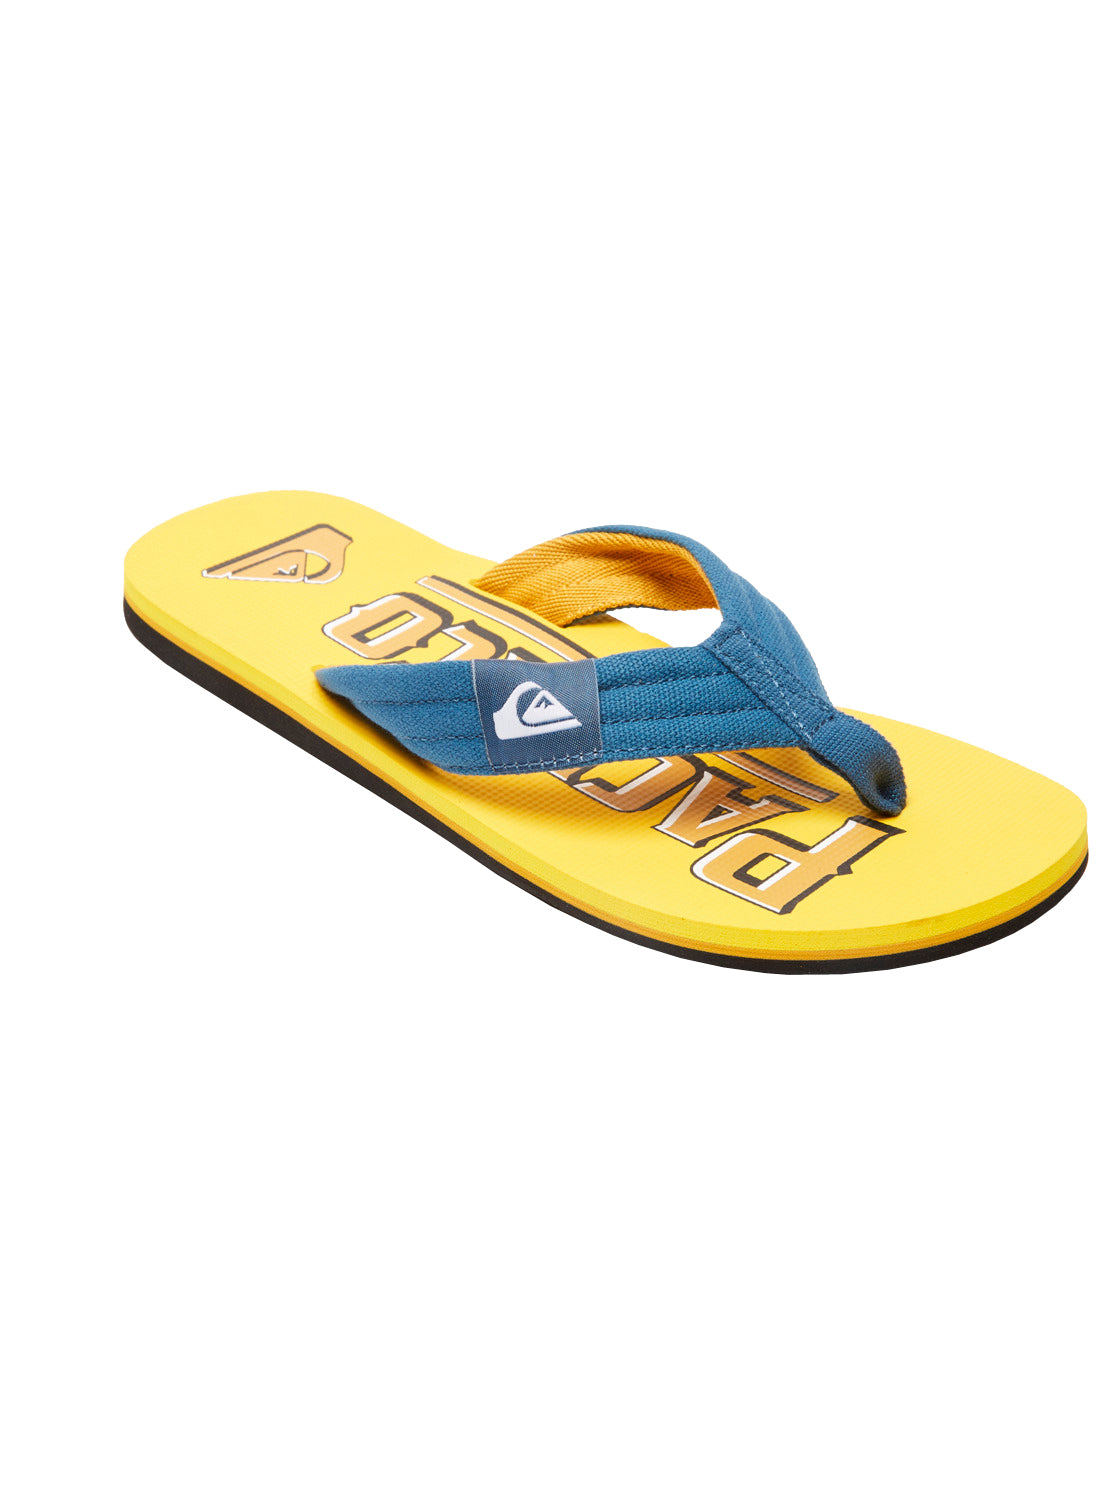 Quiksilver X Pacifico Layback Sandal XKKY 14